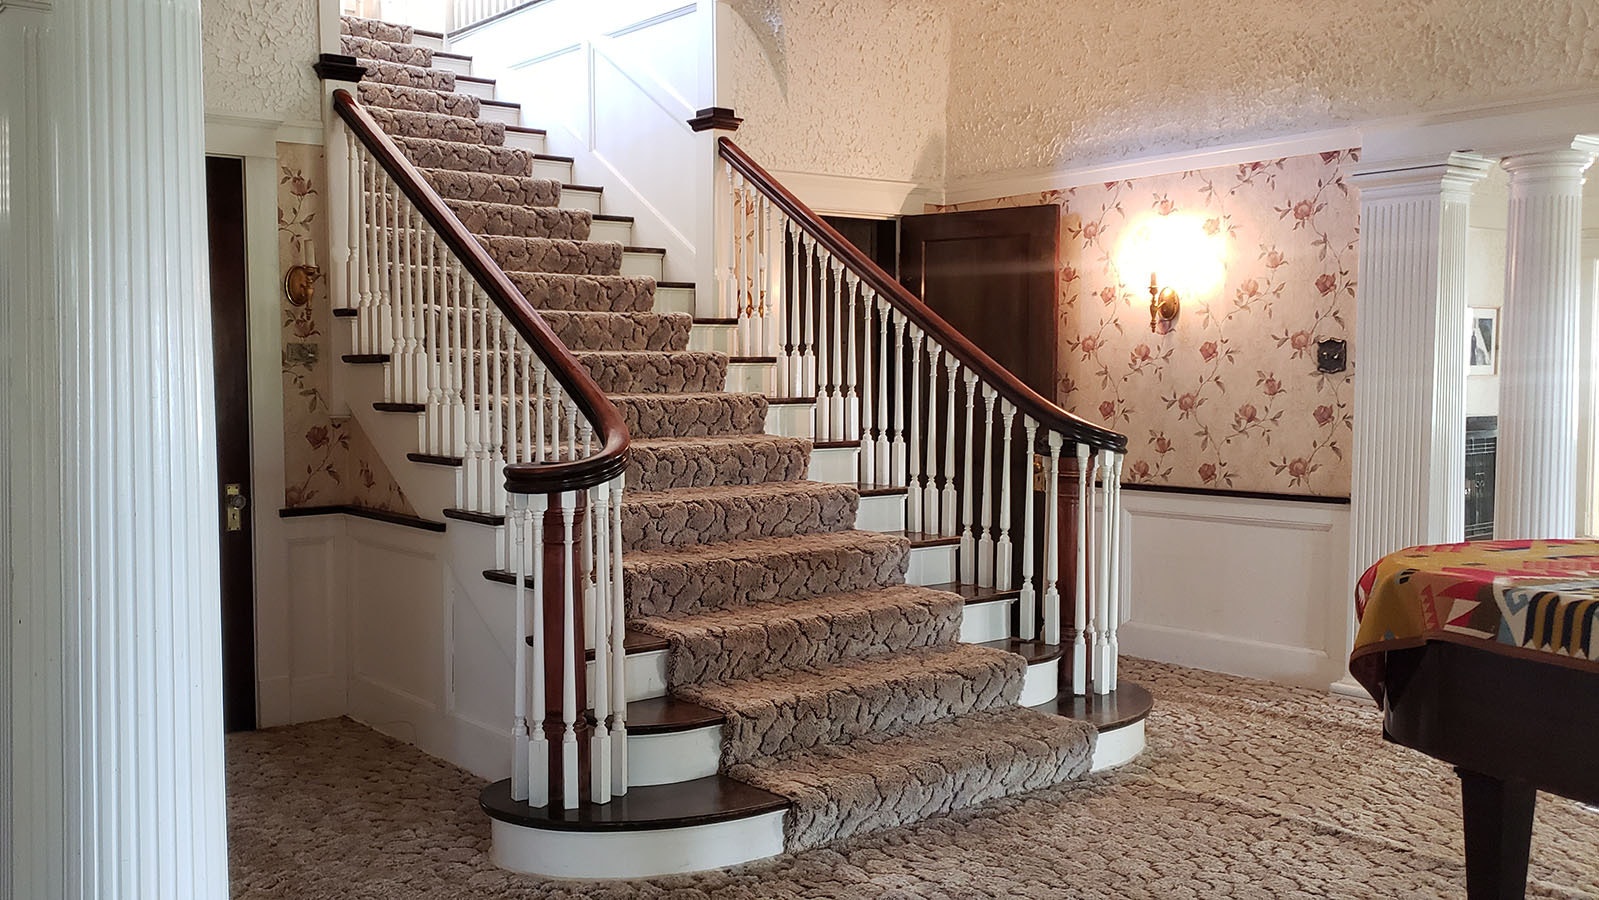 A grand staircase in the entryway leads up to spacious bedrooms at the Arapaho Ranch.